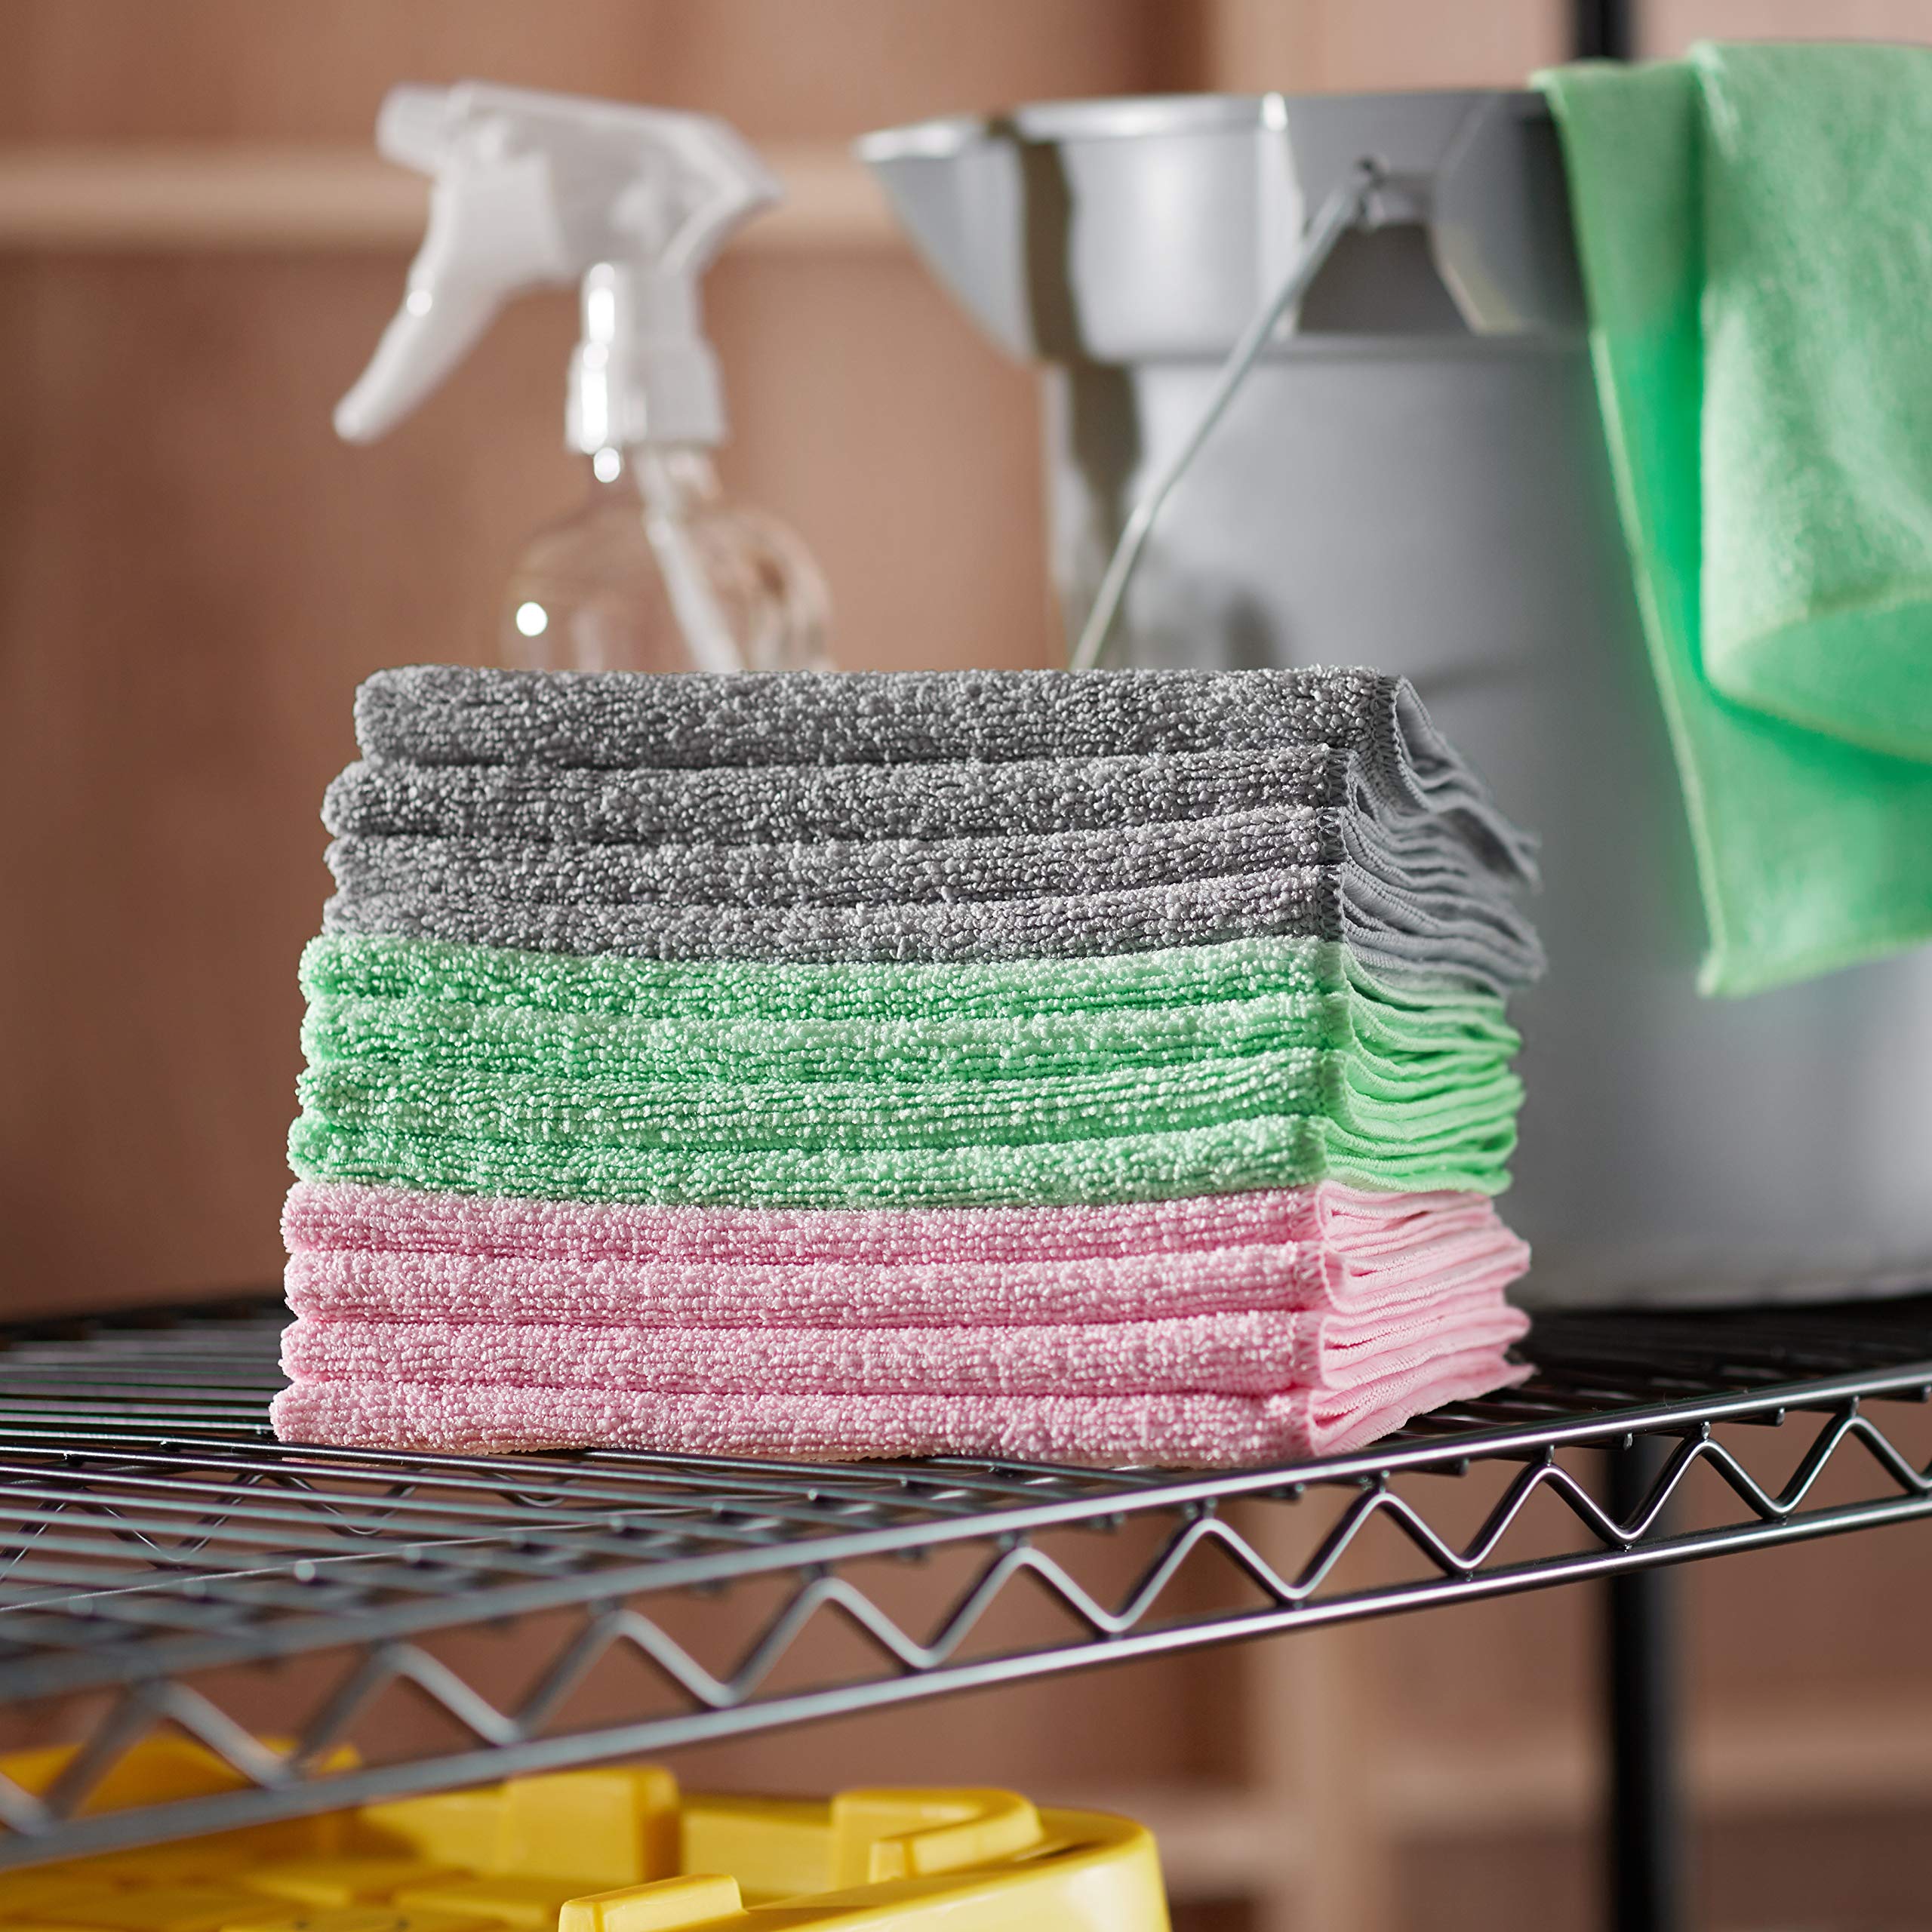 Amazon Basics Microfiber Cleaning Cloth, Non-Abrasive, Reusable and Washable, Pack of 36, Green/Gray/Pink, 16